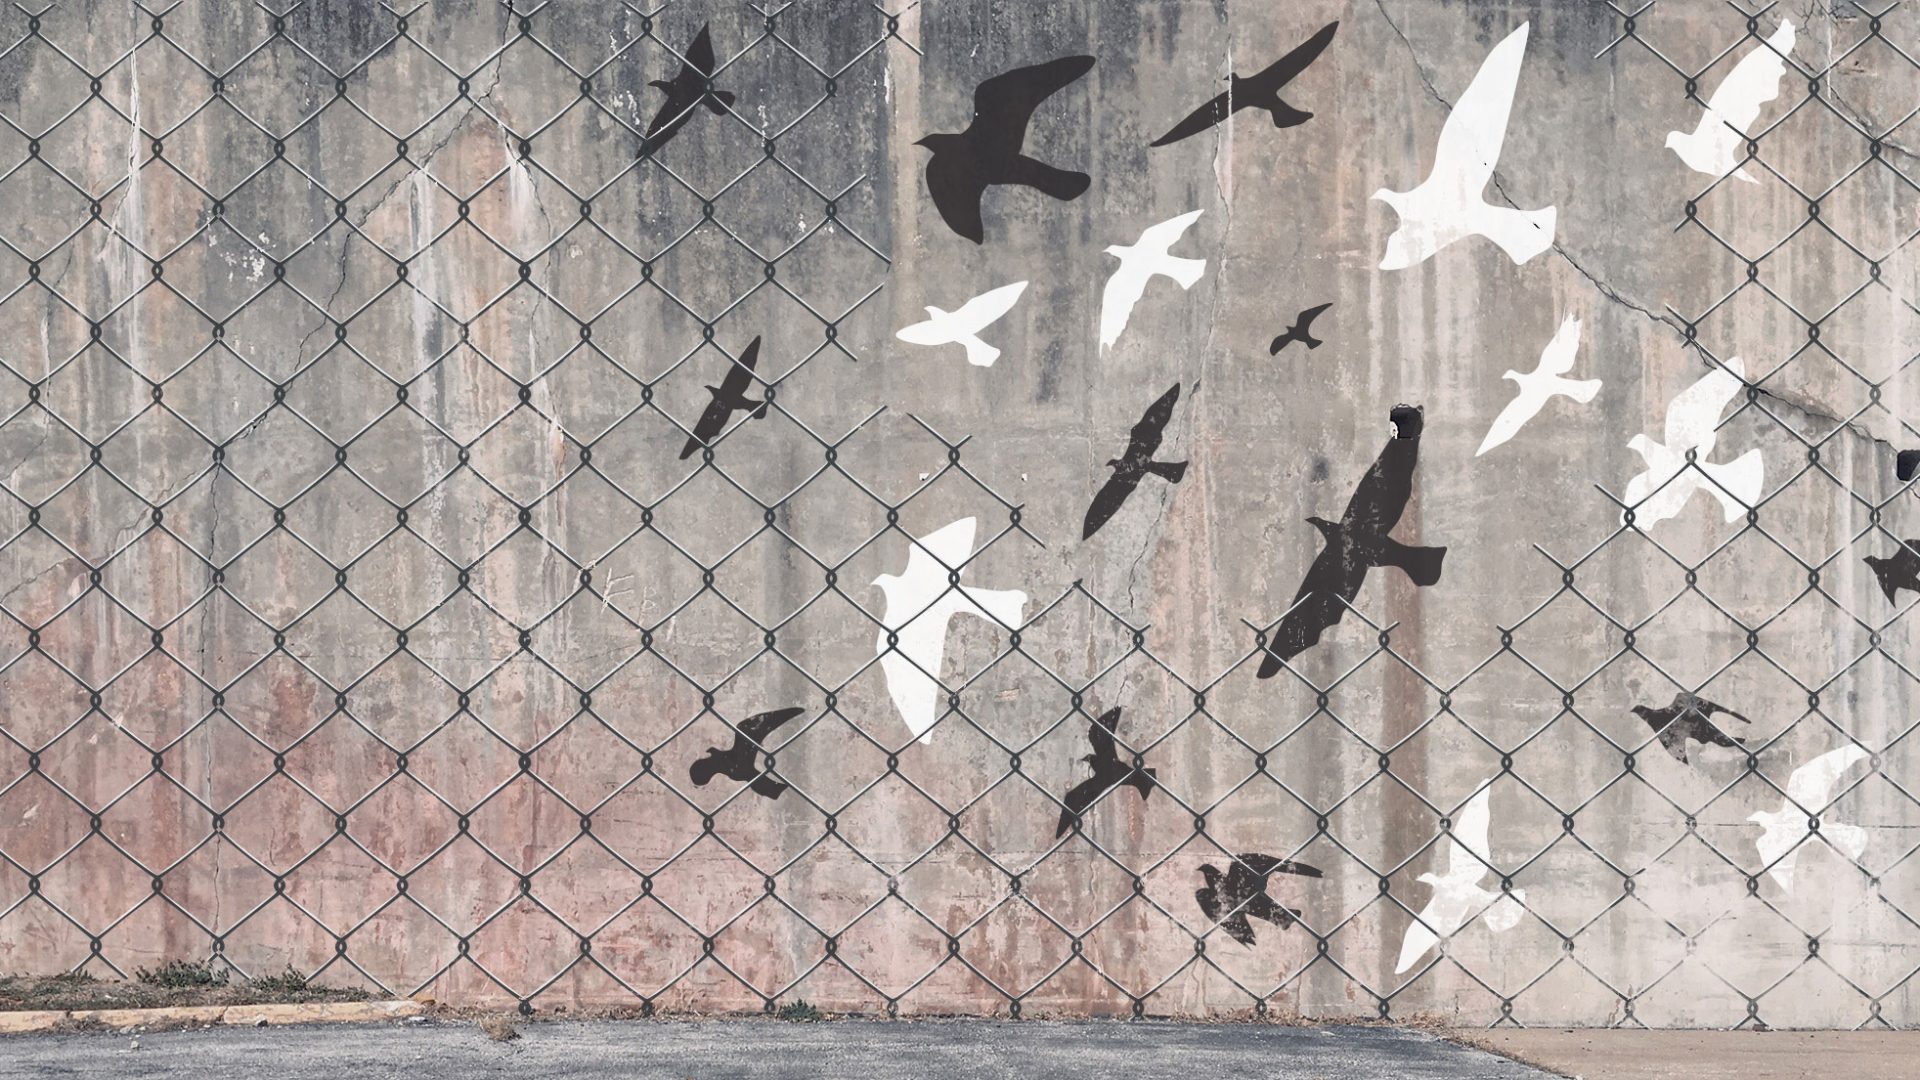 Public art painting on a grungy concrete wall of birds flying free through a hole in a fence